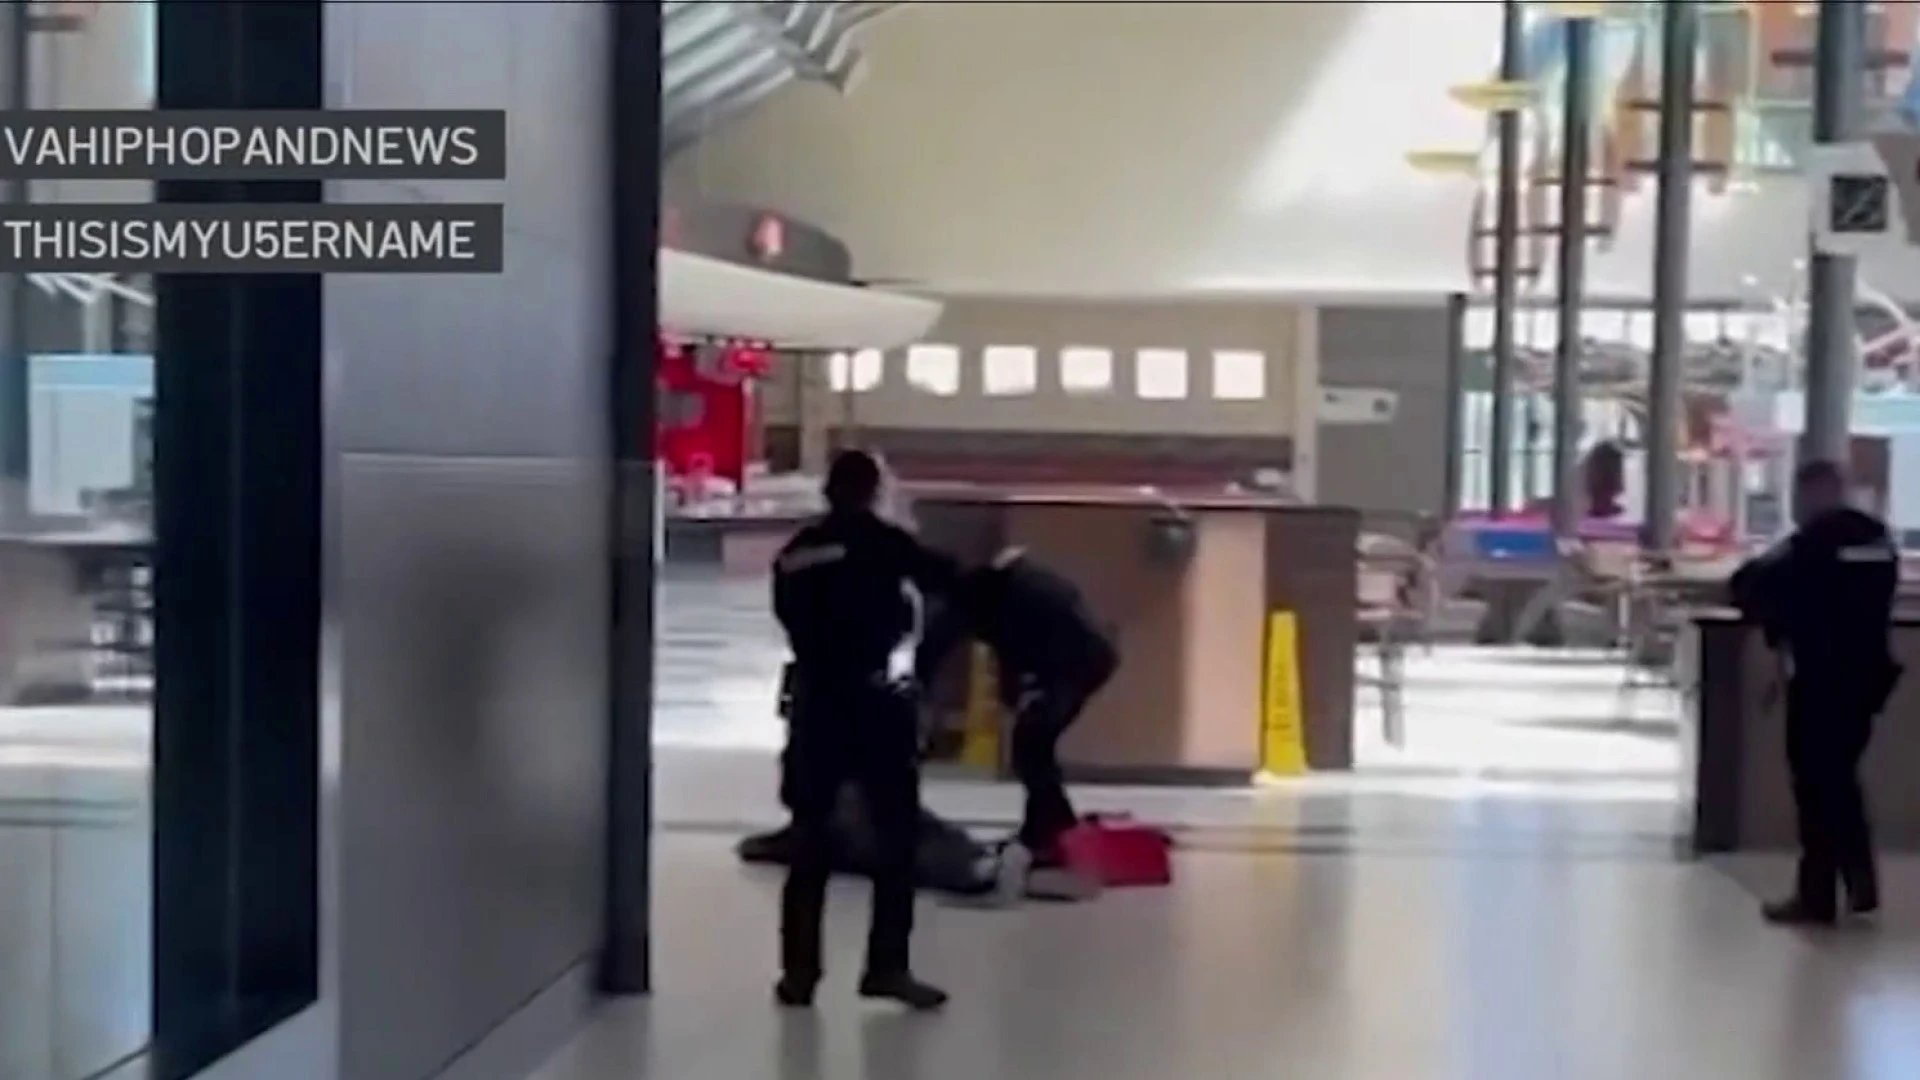 Man injured, suspect arrested in shooting at Dulles Town Center